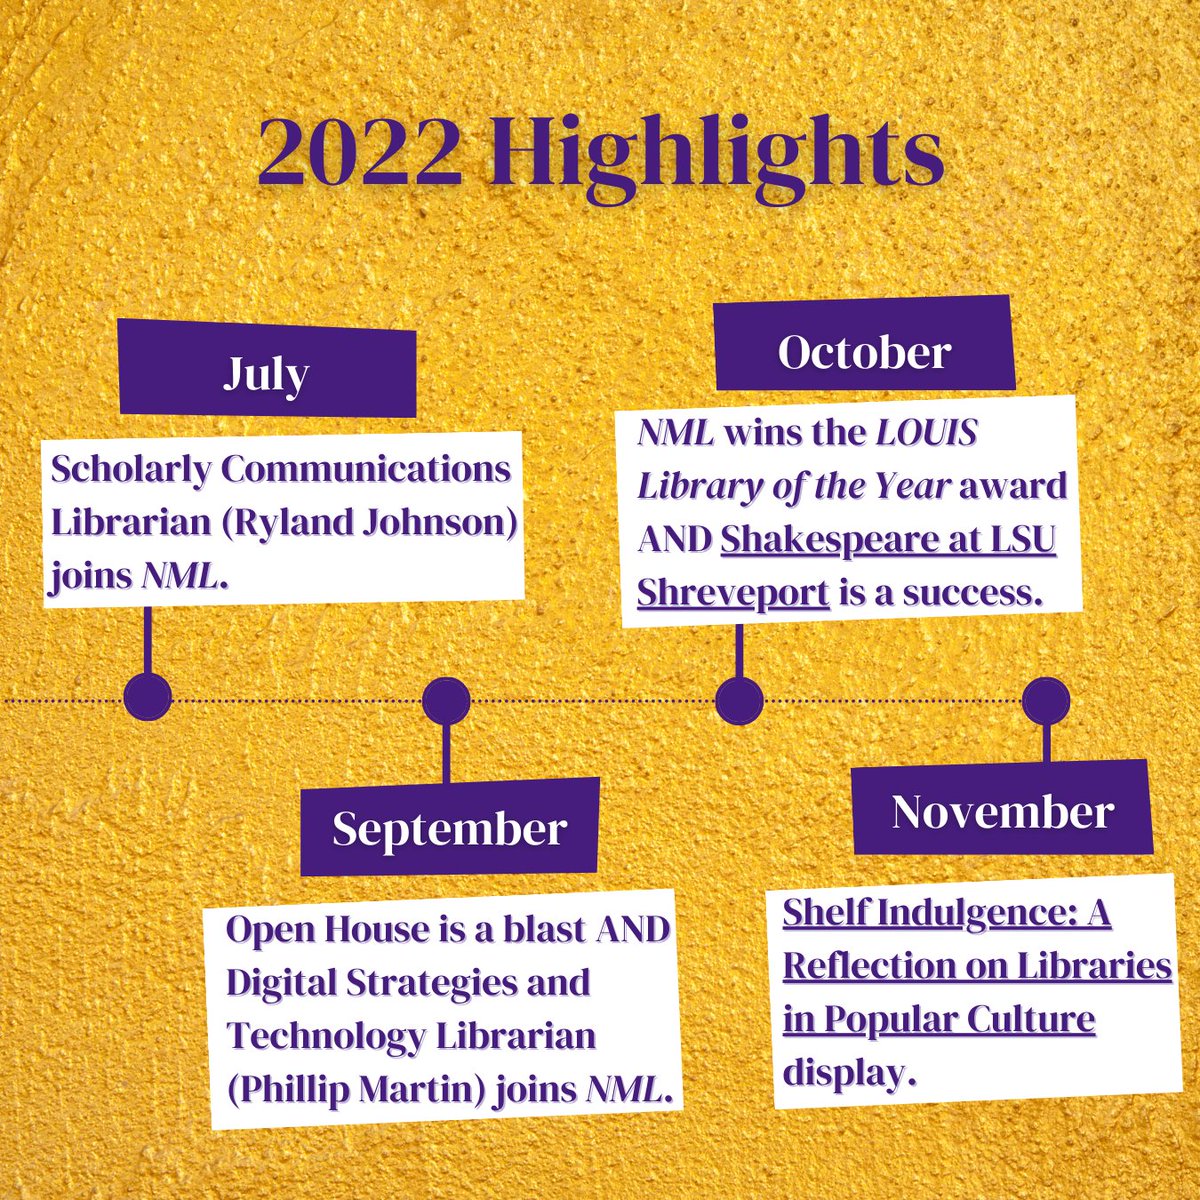 2022 was a great year for LSUS Noel Memorial Library! Take a look back at some highlights of 2022 for NML. We hope LSUS students, staff, and faculty have a wonderful 2023! #lsus #newyear #collegelibrary #academiclibrary #library #librariesoftwitter @louislibraries